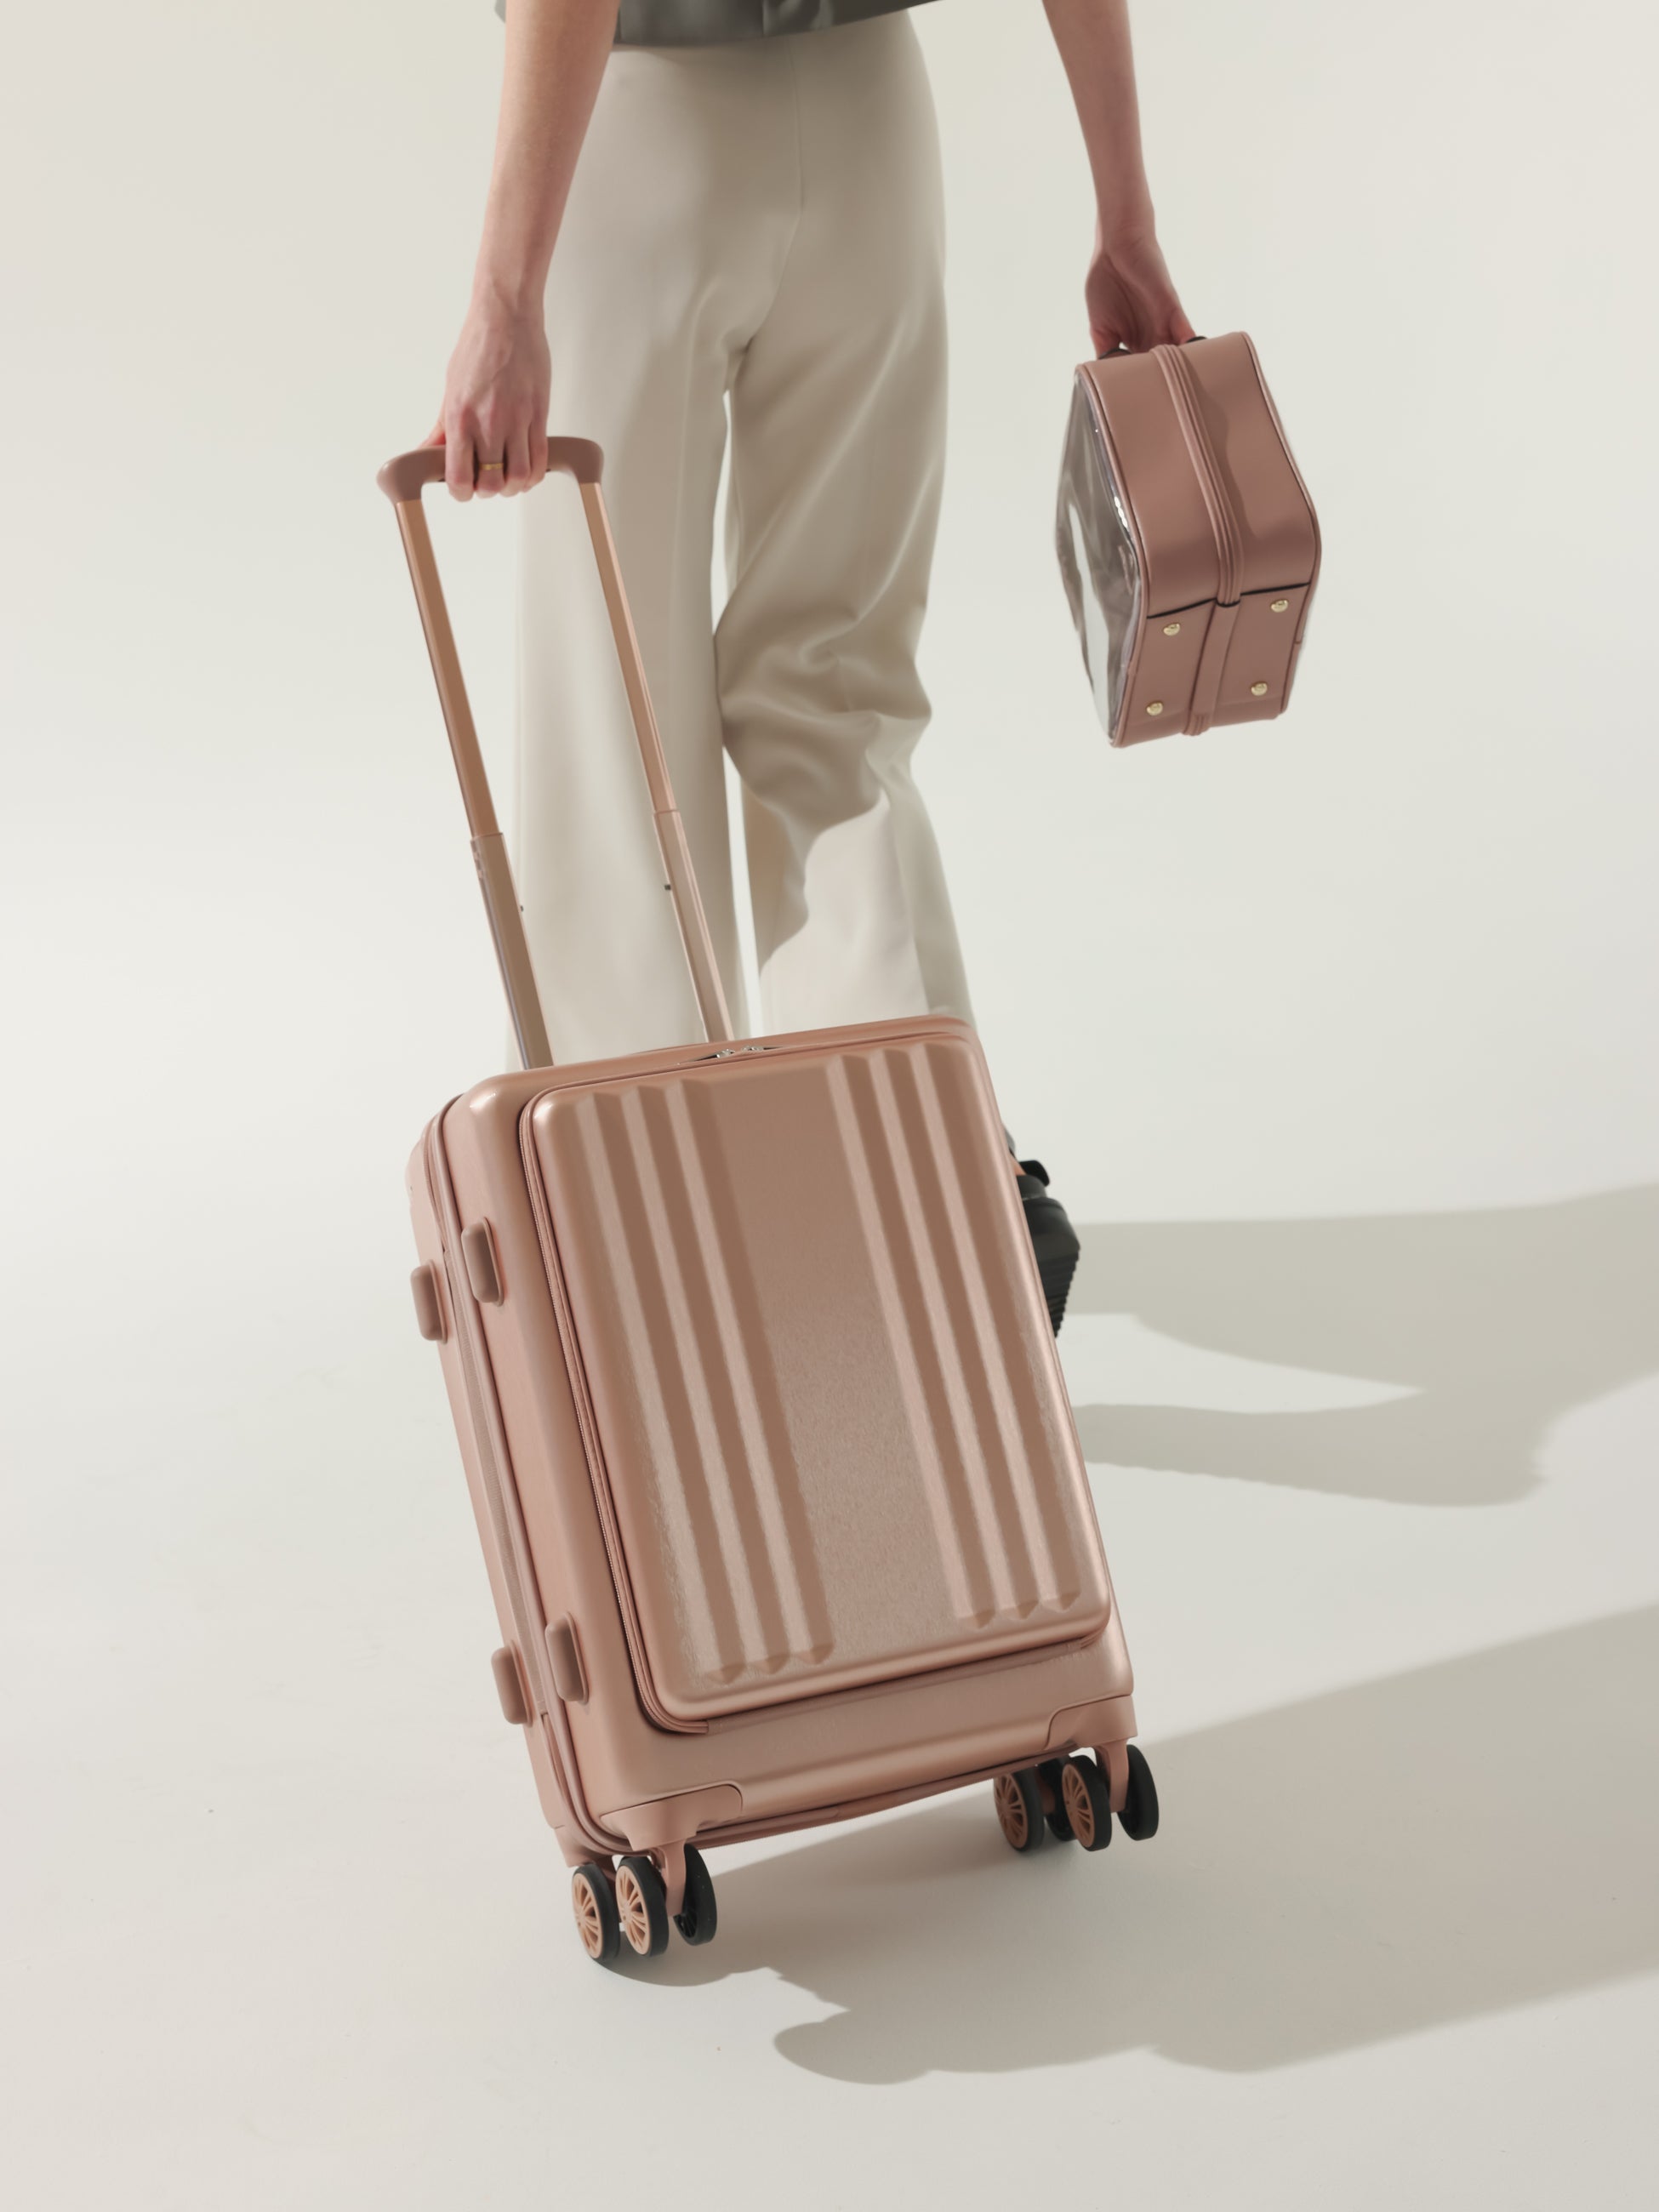 Model rolling CALPAK Ambeur carry on luggage with front pocket for laptop in rose gold